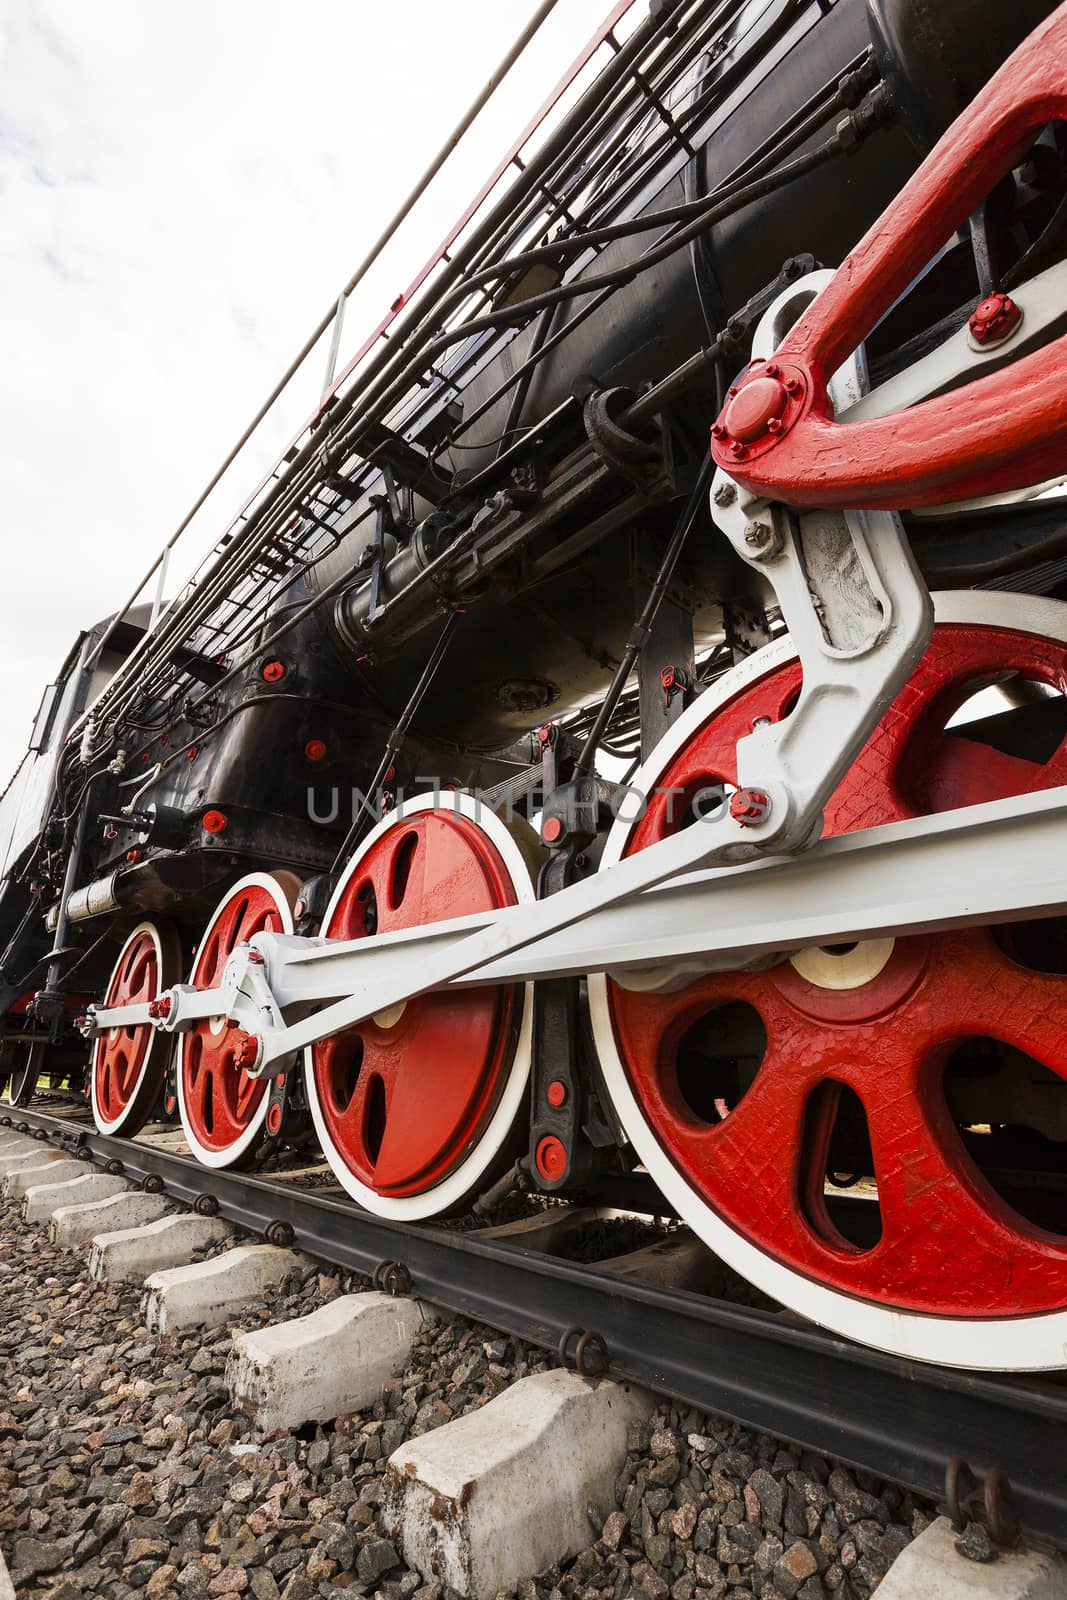   the wheels of the old train photographed by a close up